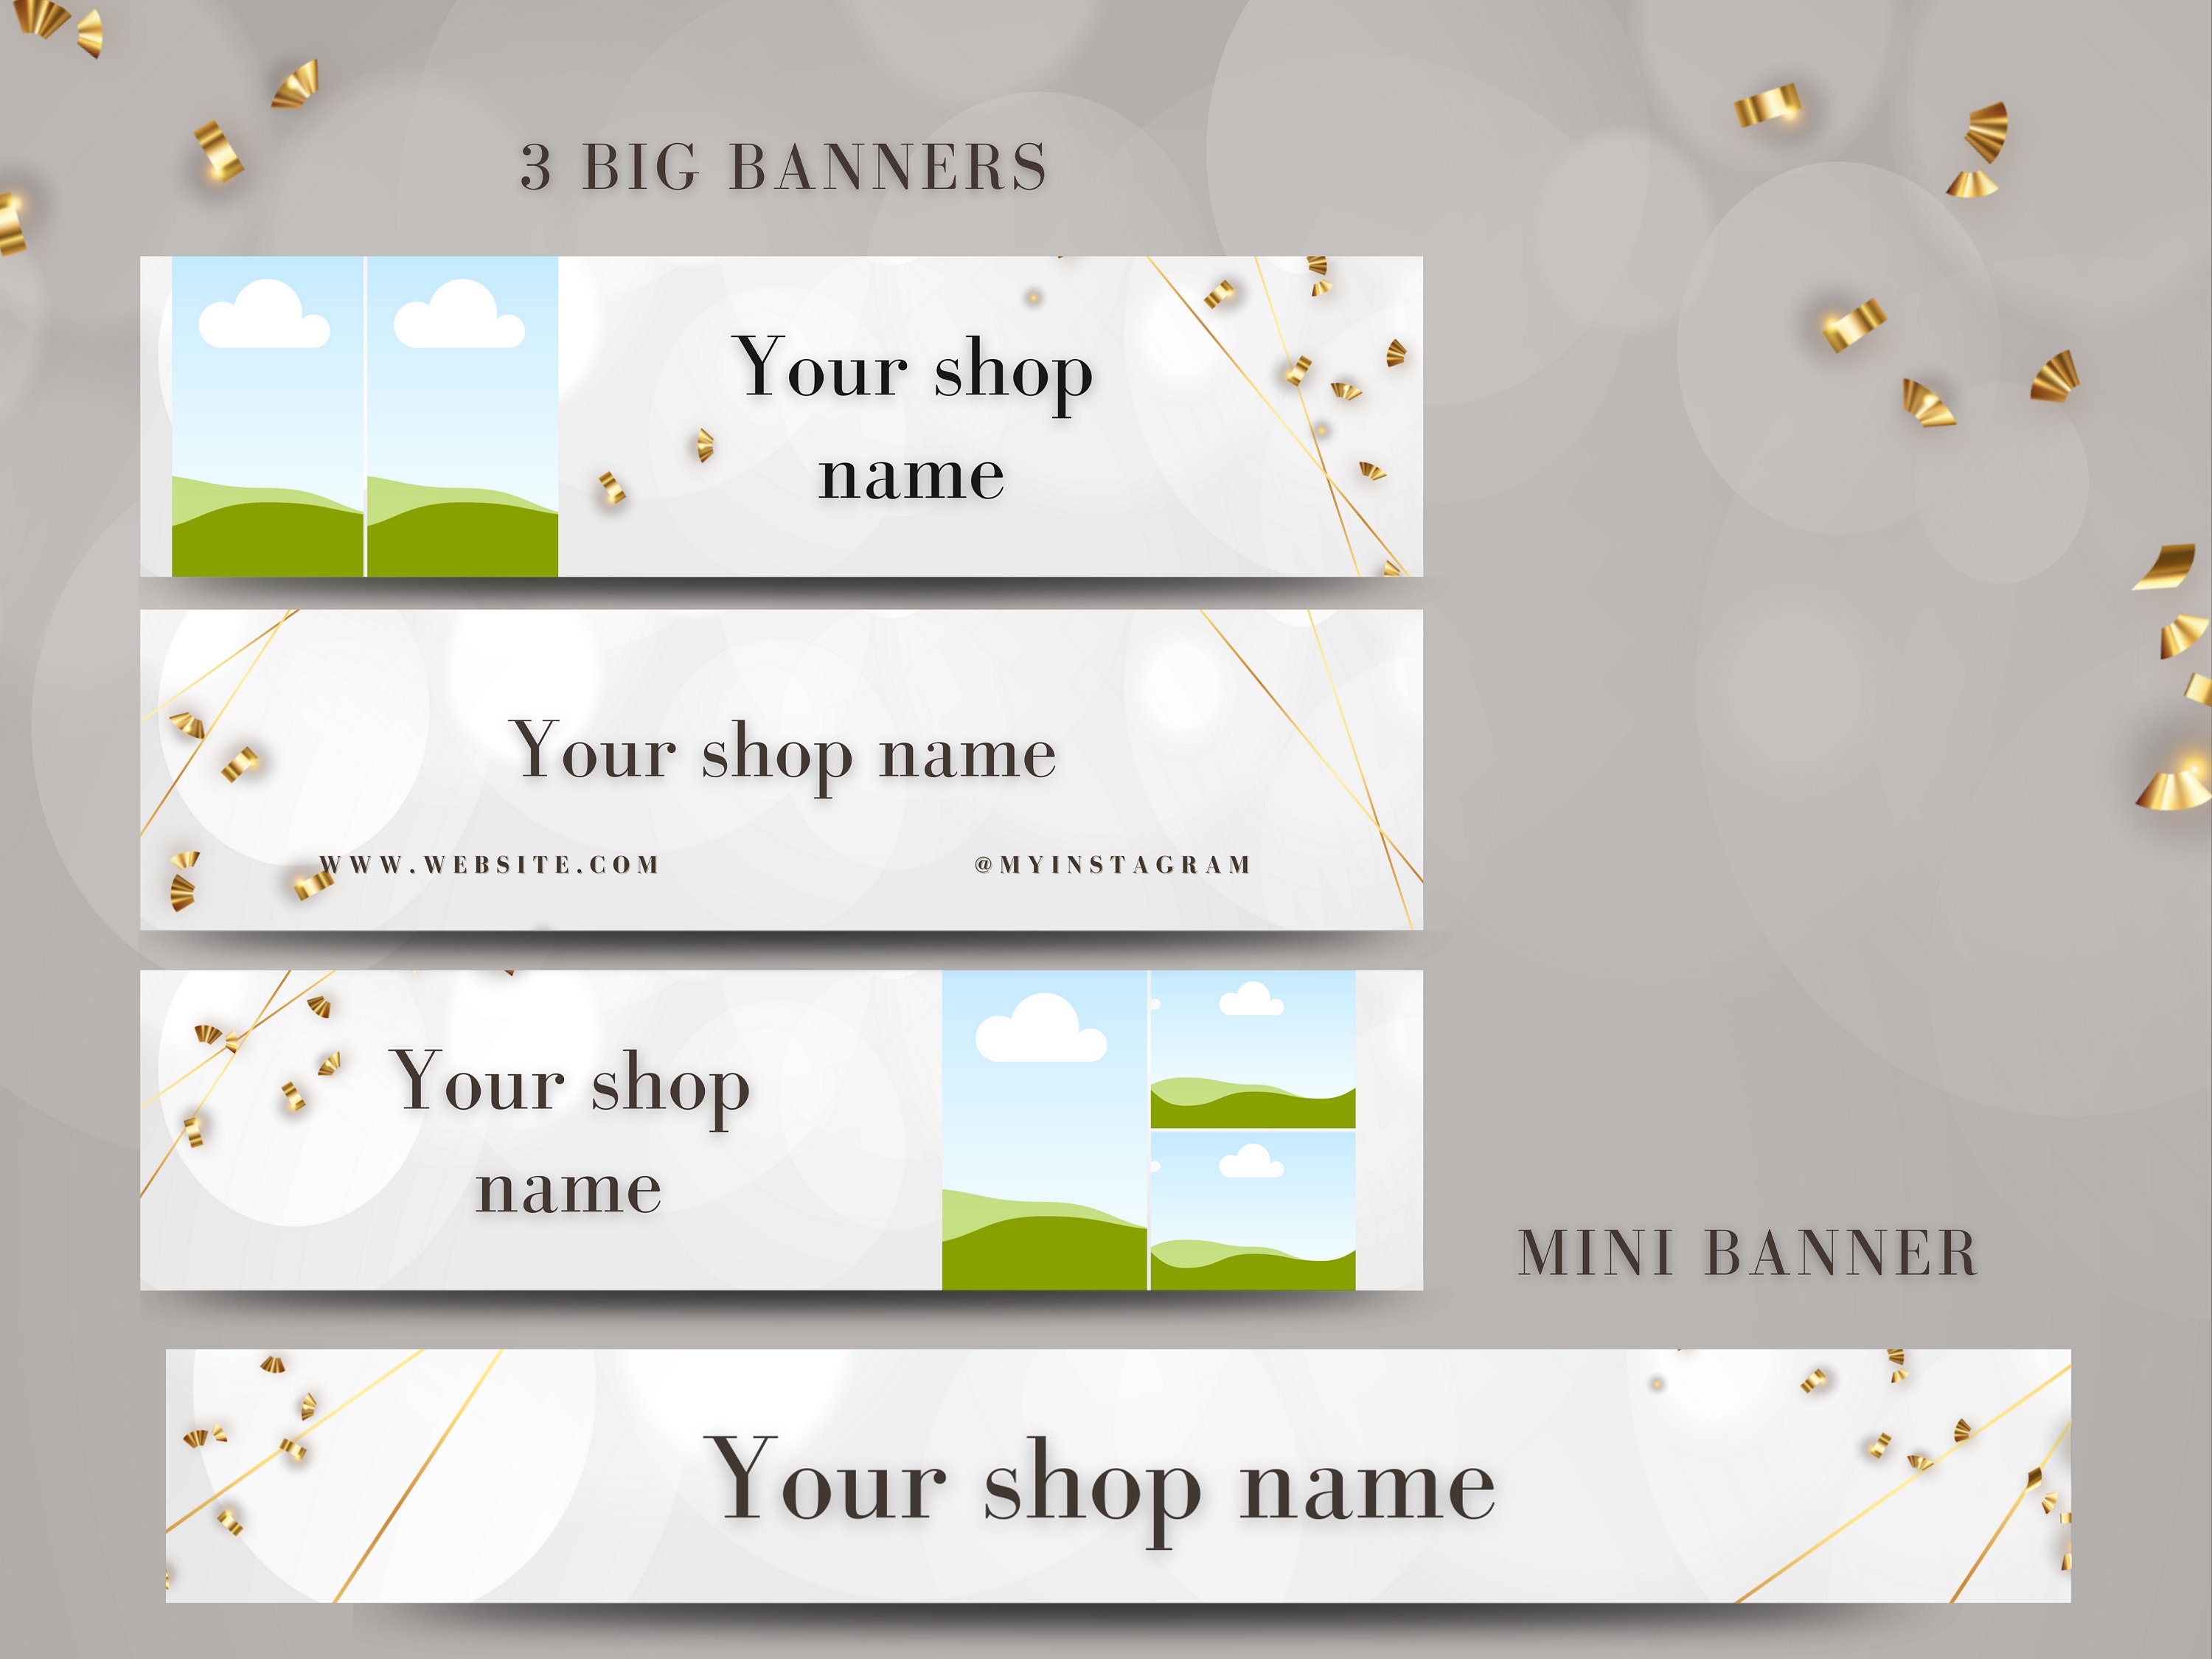 Etsy Banner Template